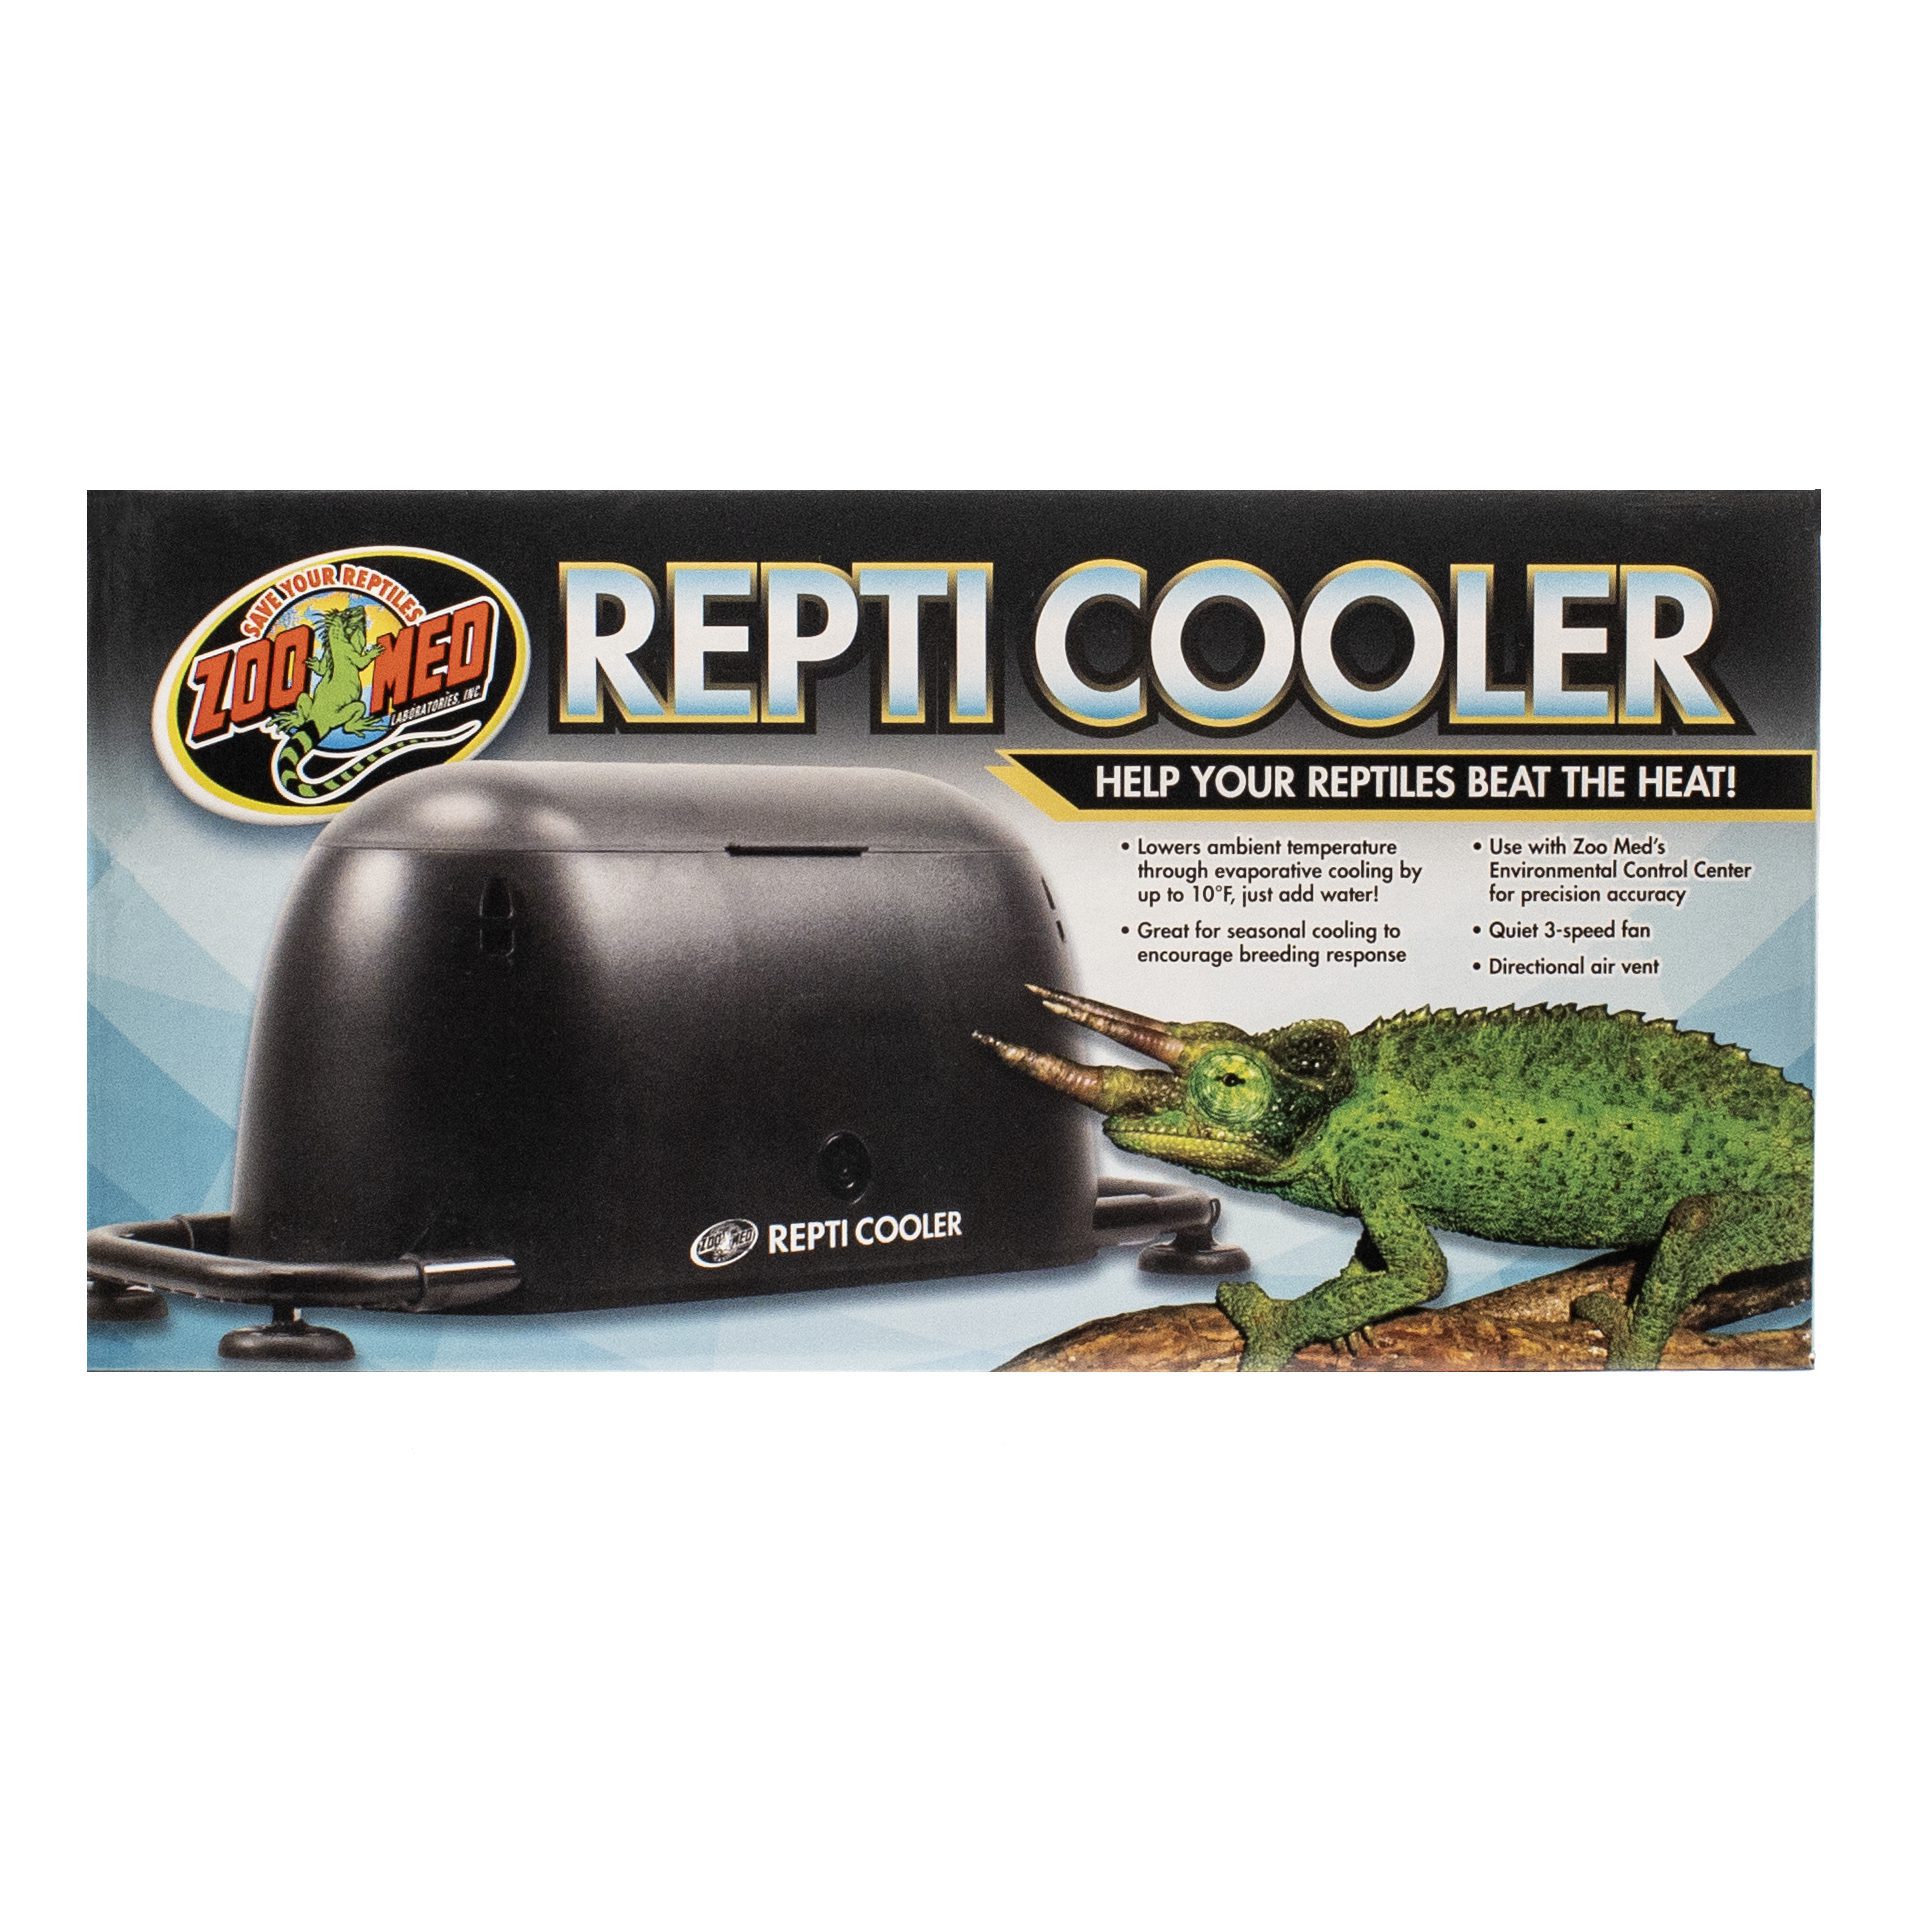 Reptile Digital Thermostat  Microclimate Thermostats - Pangea